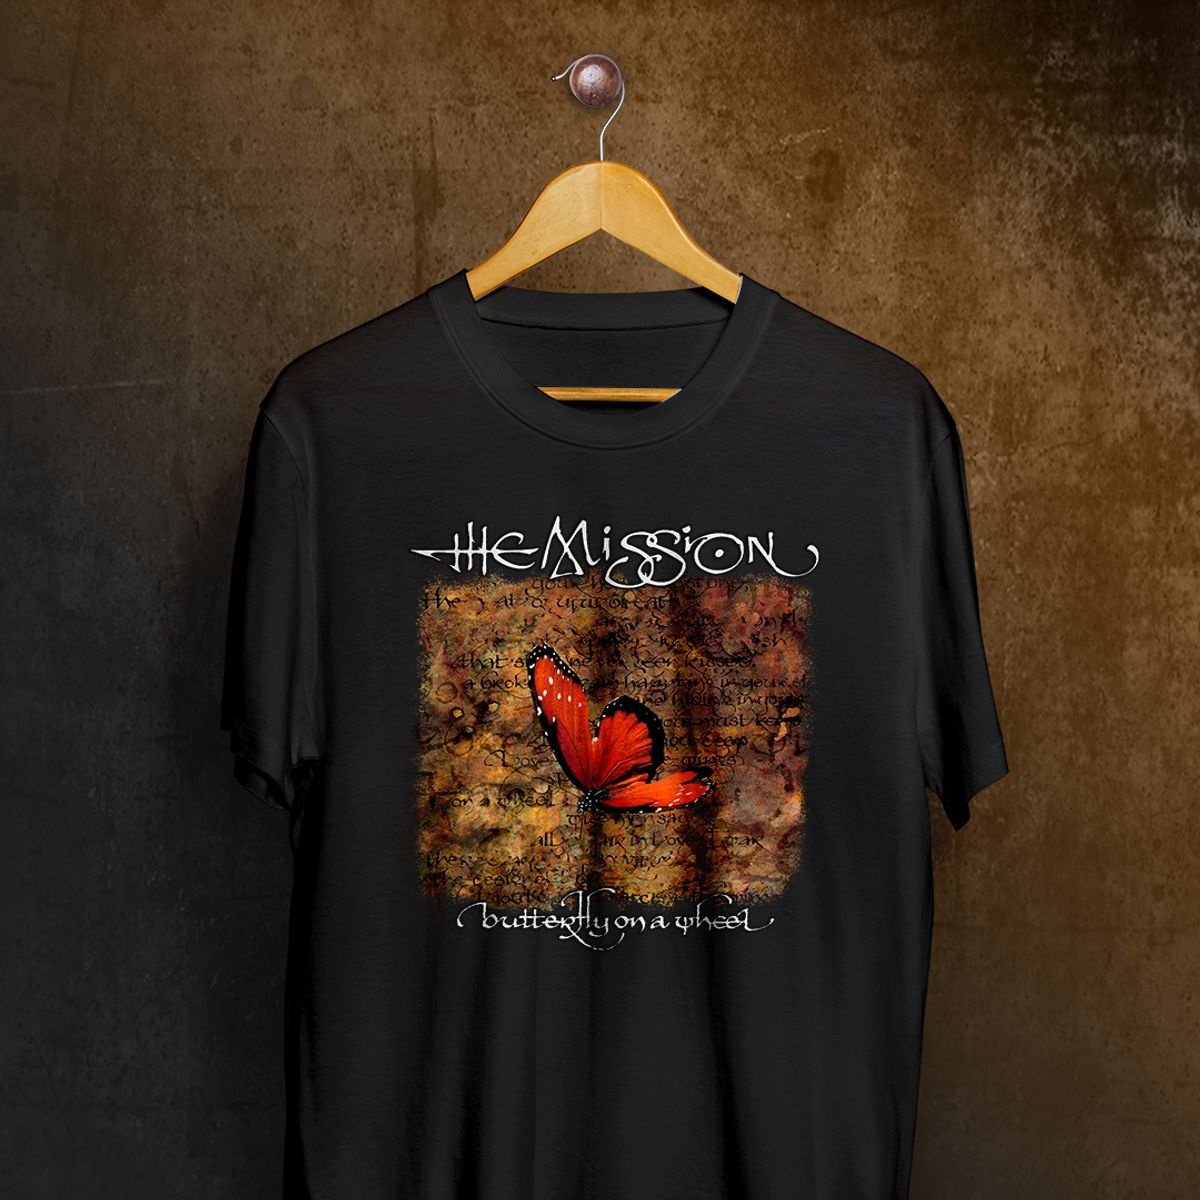 Nome do produto: Camiseta The Mission - Butterfly on a Wheel